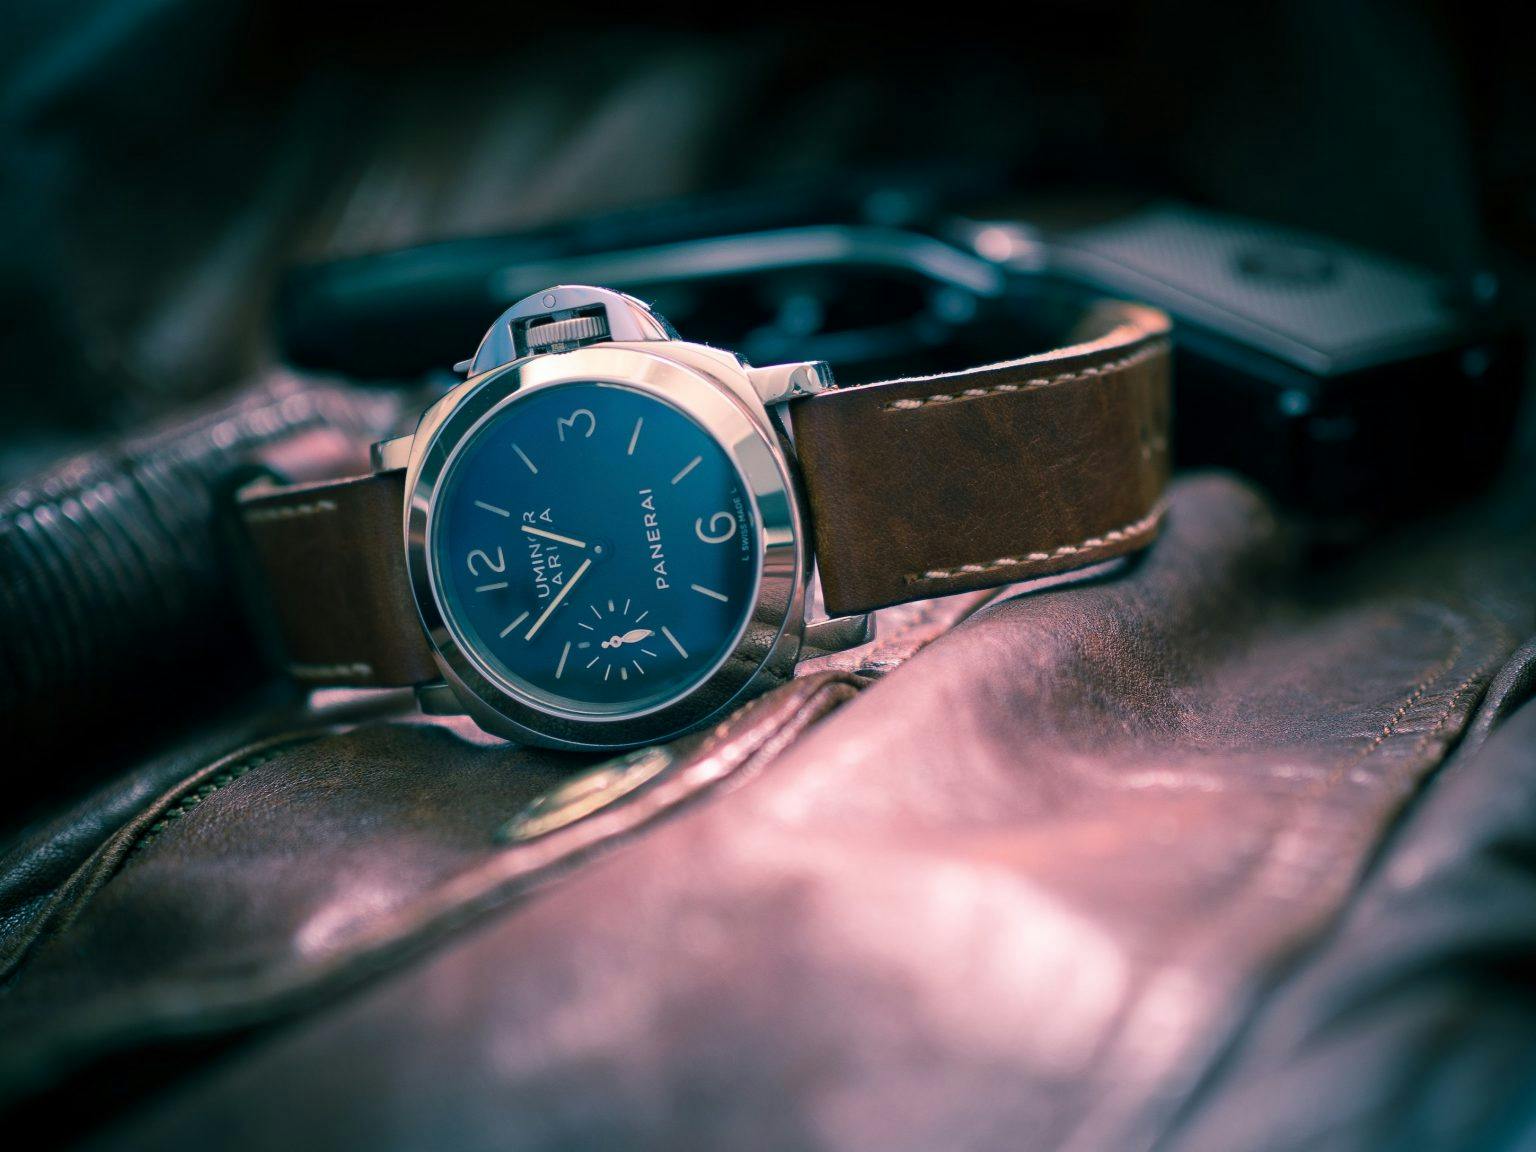 Steel Panerai Dive watch with black dial large hands and numerals and a brown leather strap